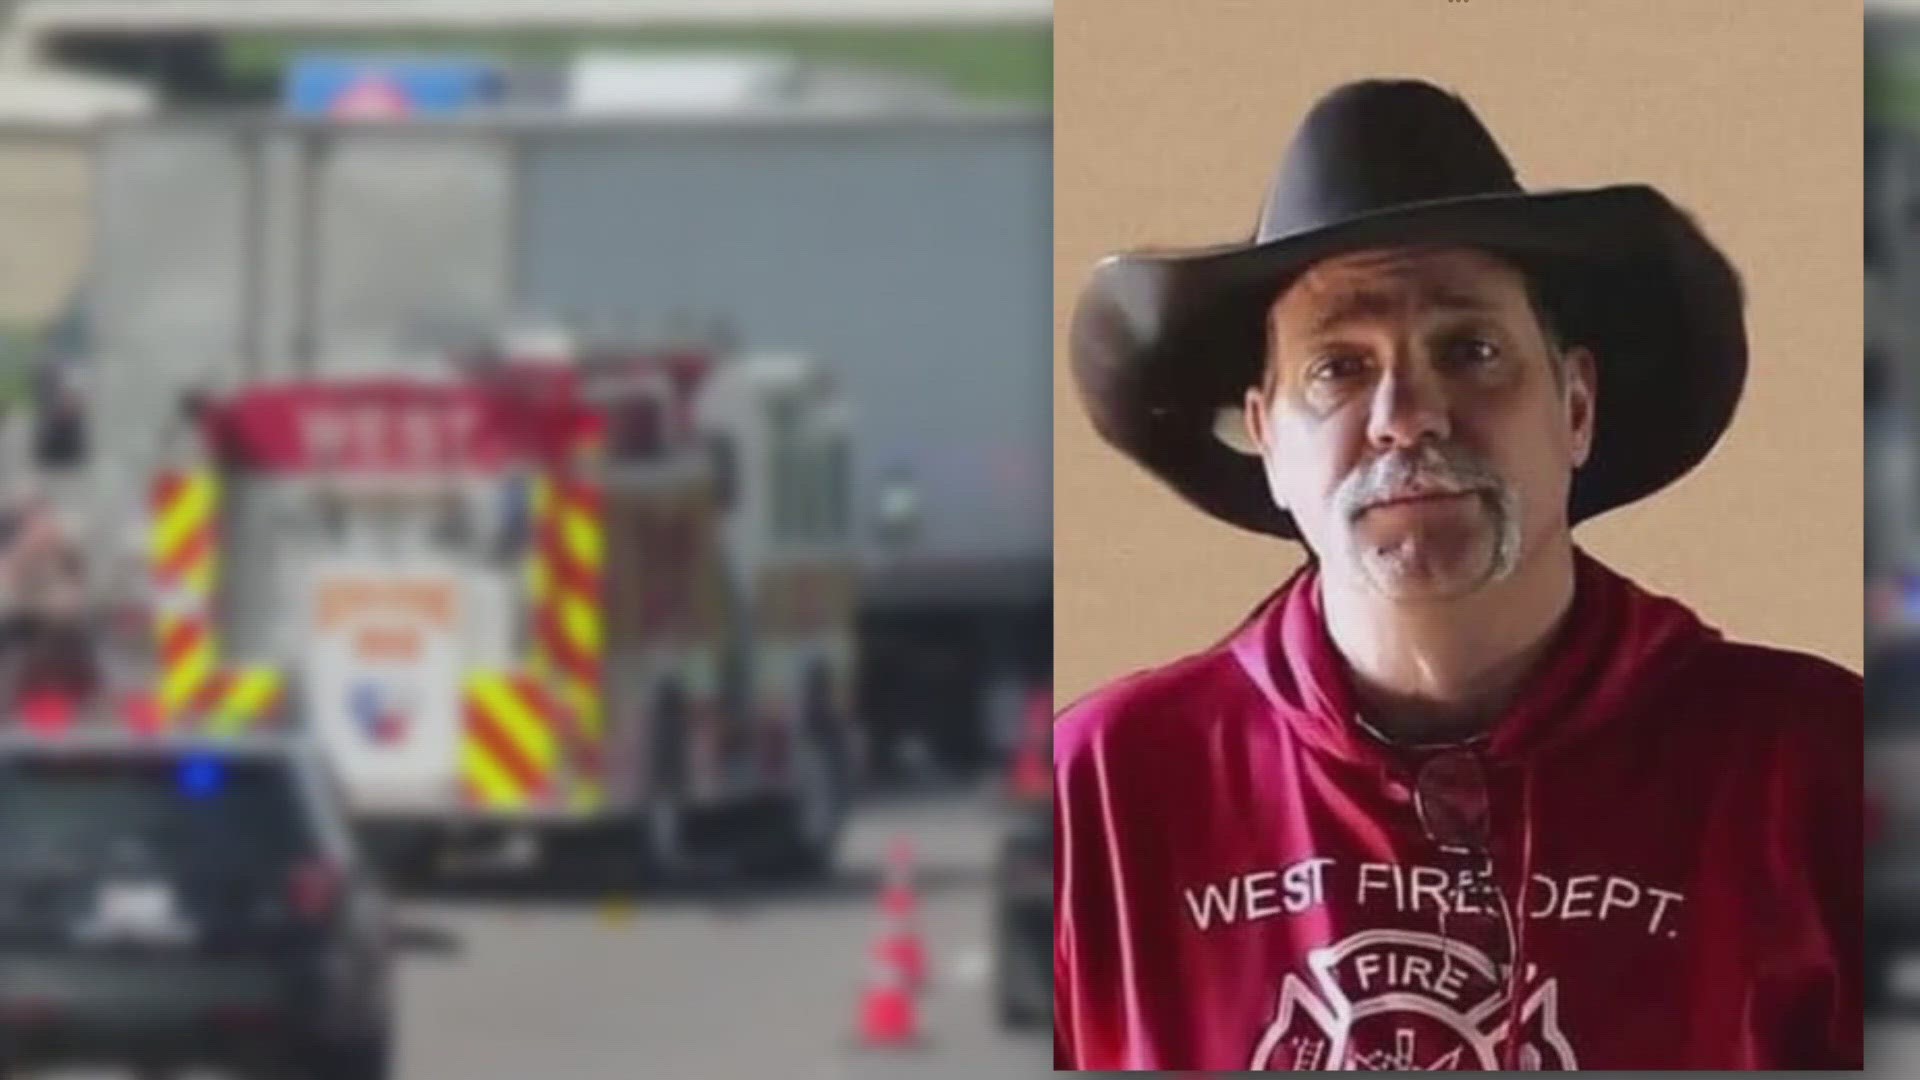 After mourning the loss of West volunteer firefighter Eddie Hykel, Central Texans are pushing to strengthen the "Slow Down, Move Over" Texas law.